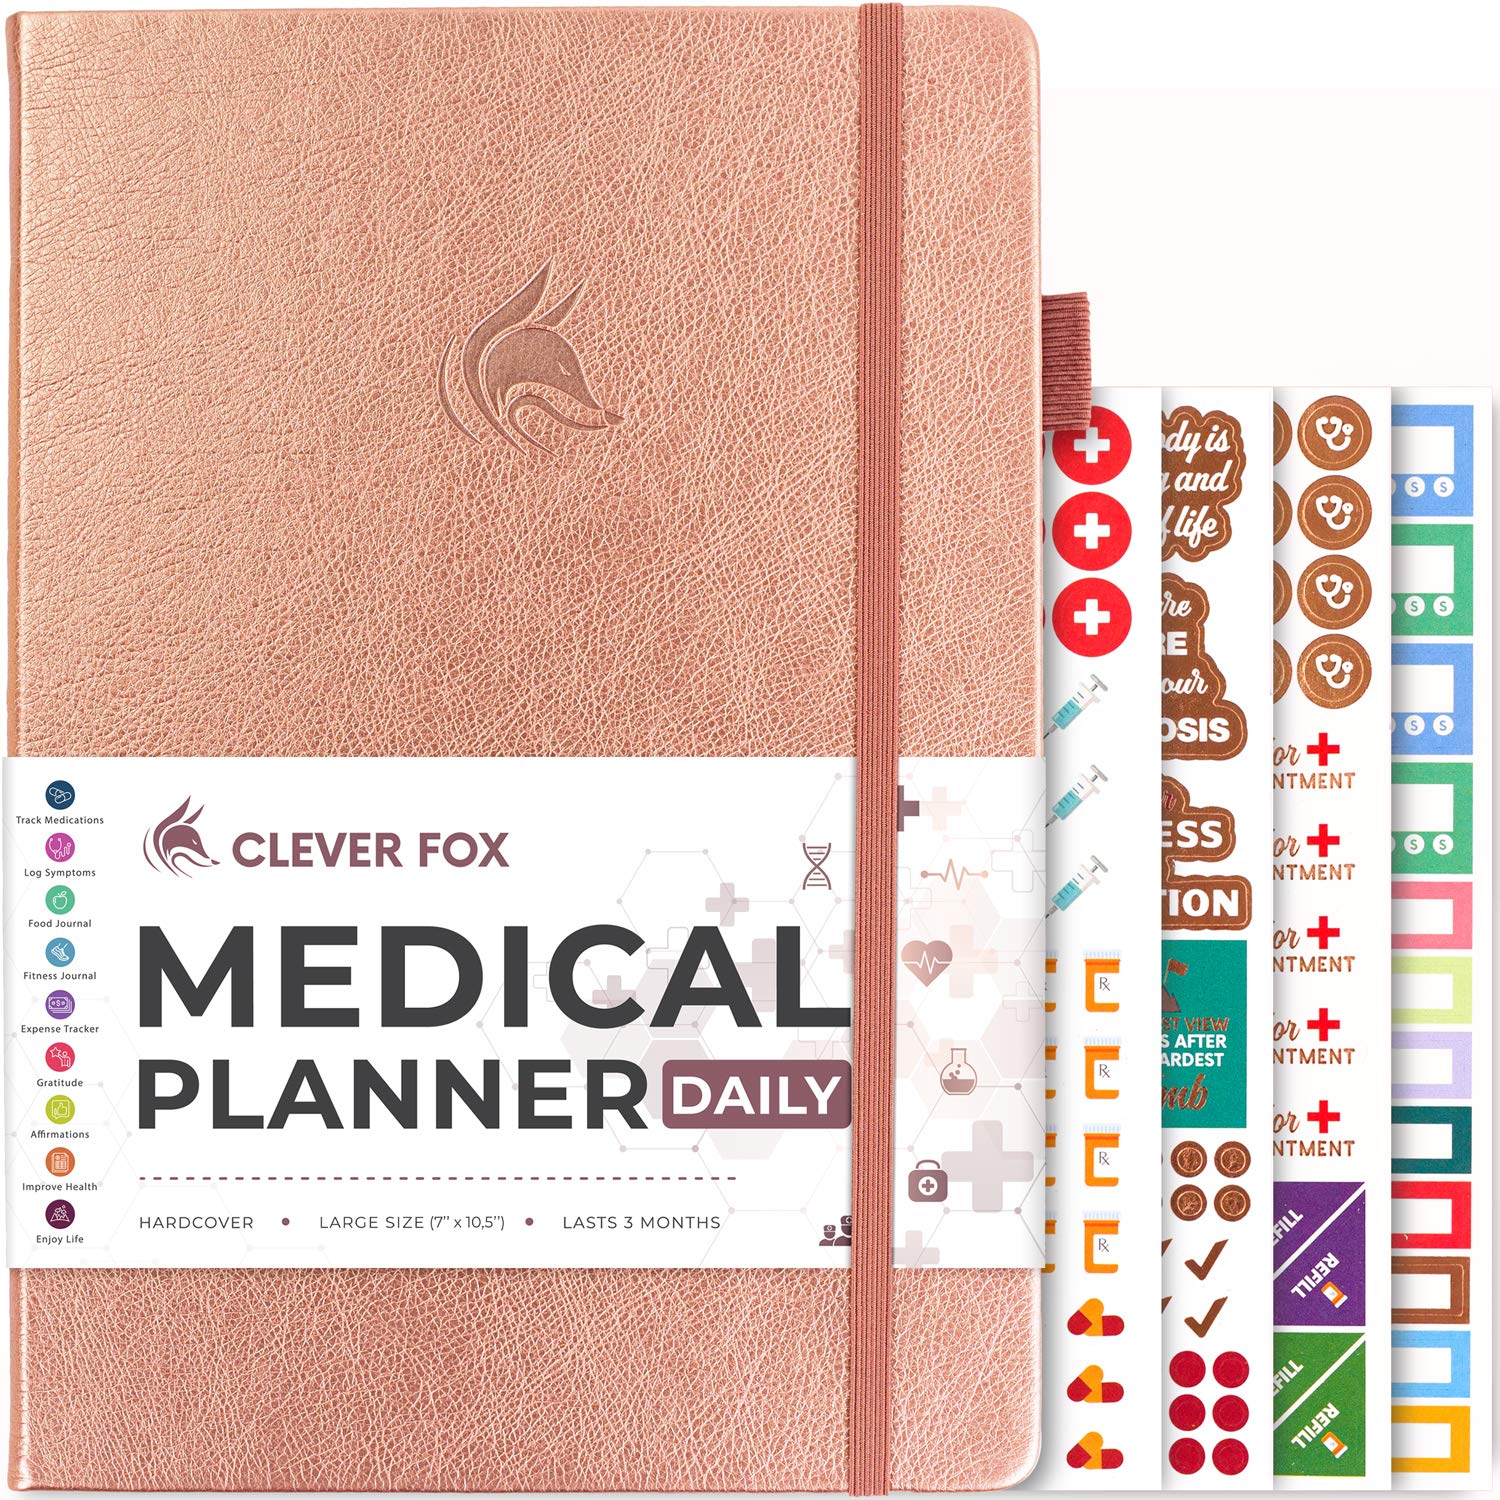 Clever Fox Medical Planner Daily - Medical Notebook, Health Diary, Wellness Journal & Logbook To Track Health - Self-Care Medica